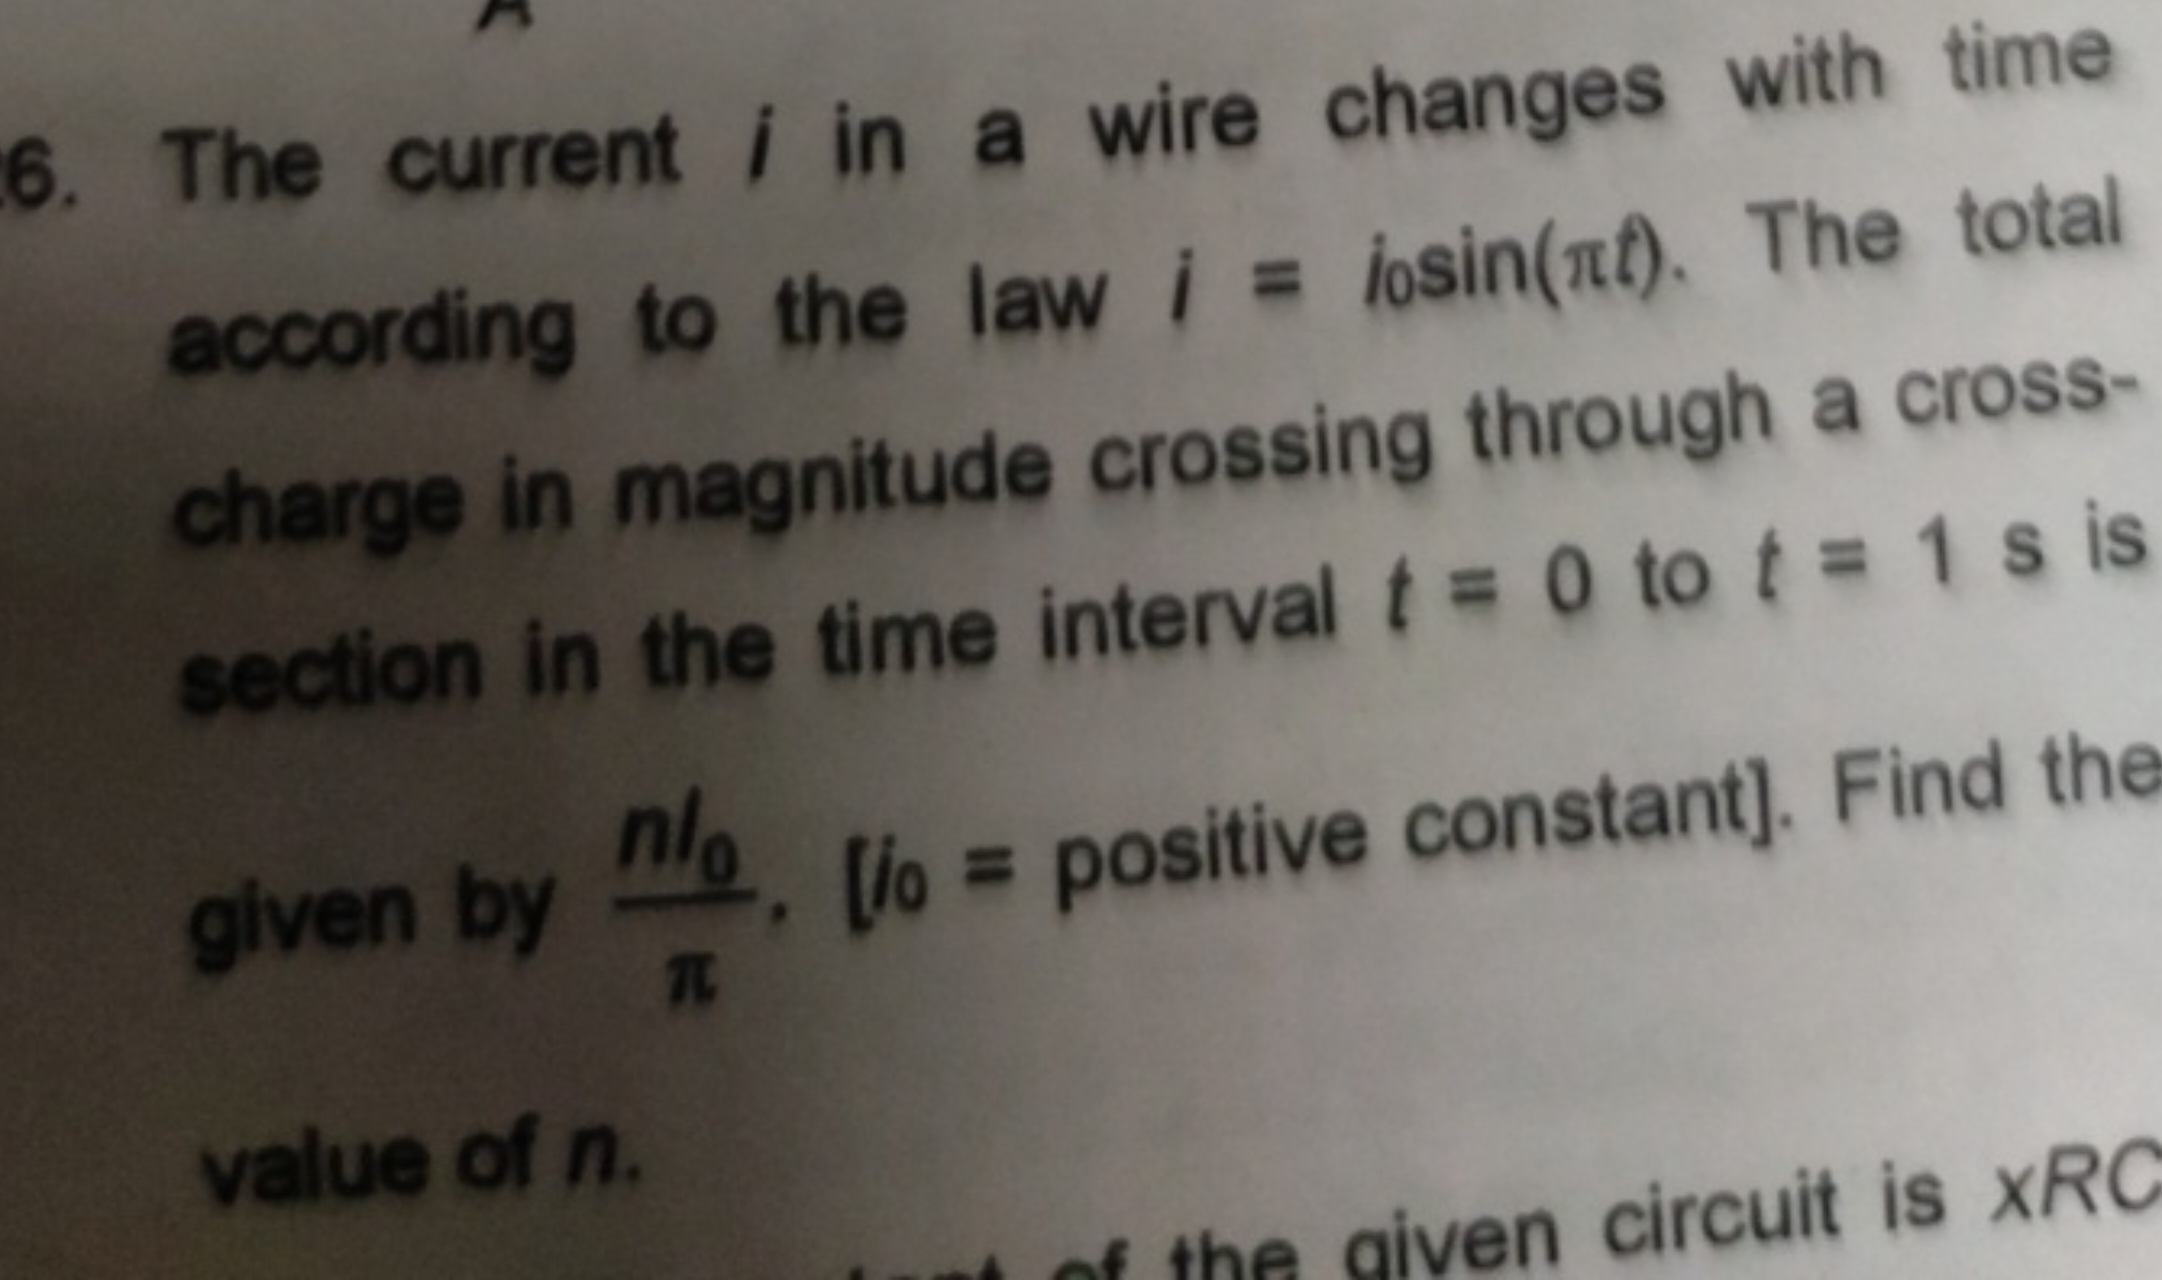 6. The current i in a wire changes with time according to the law i=10